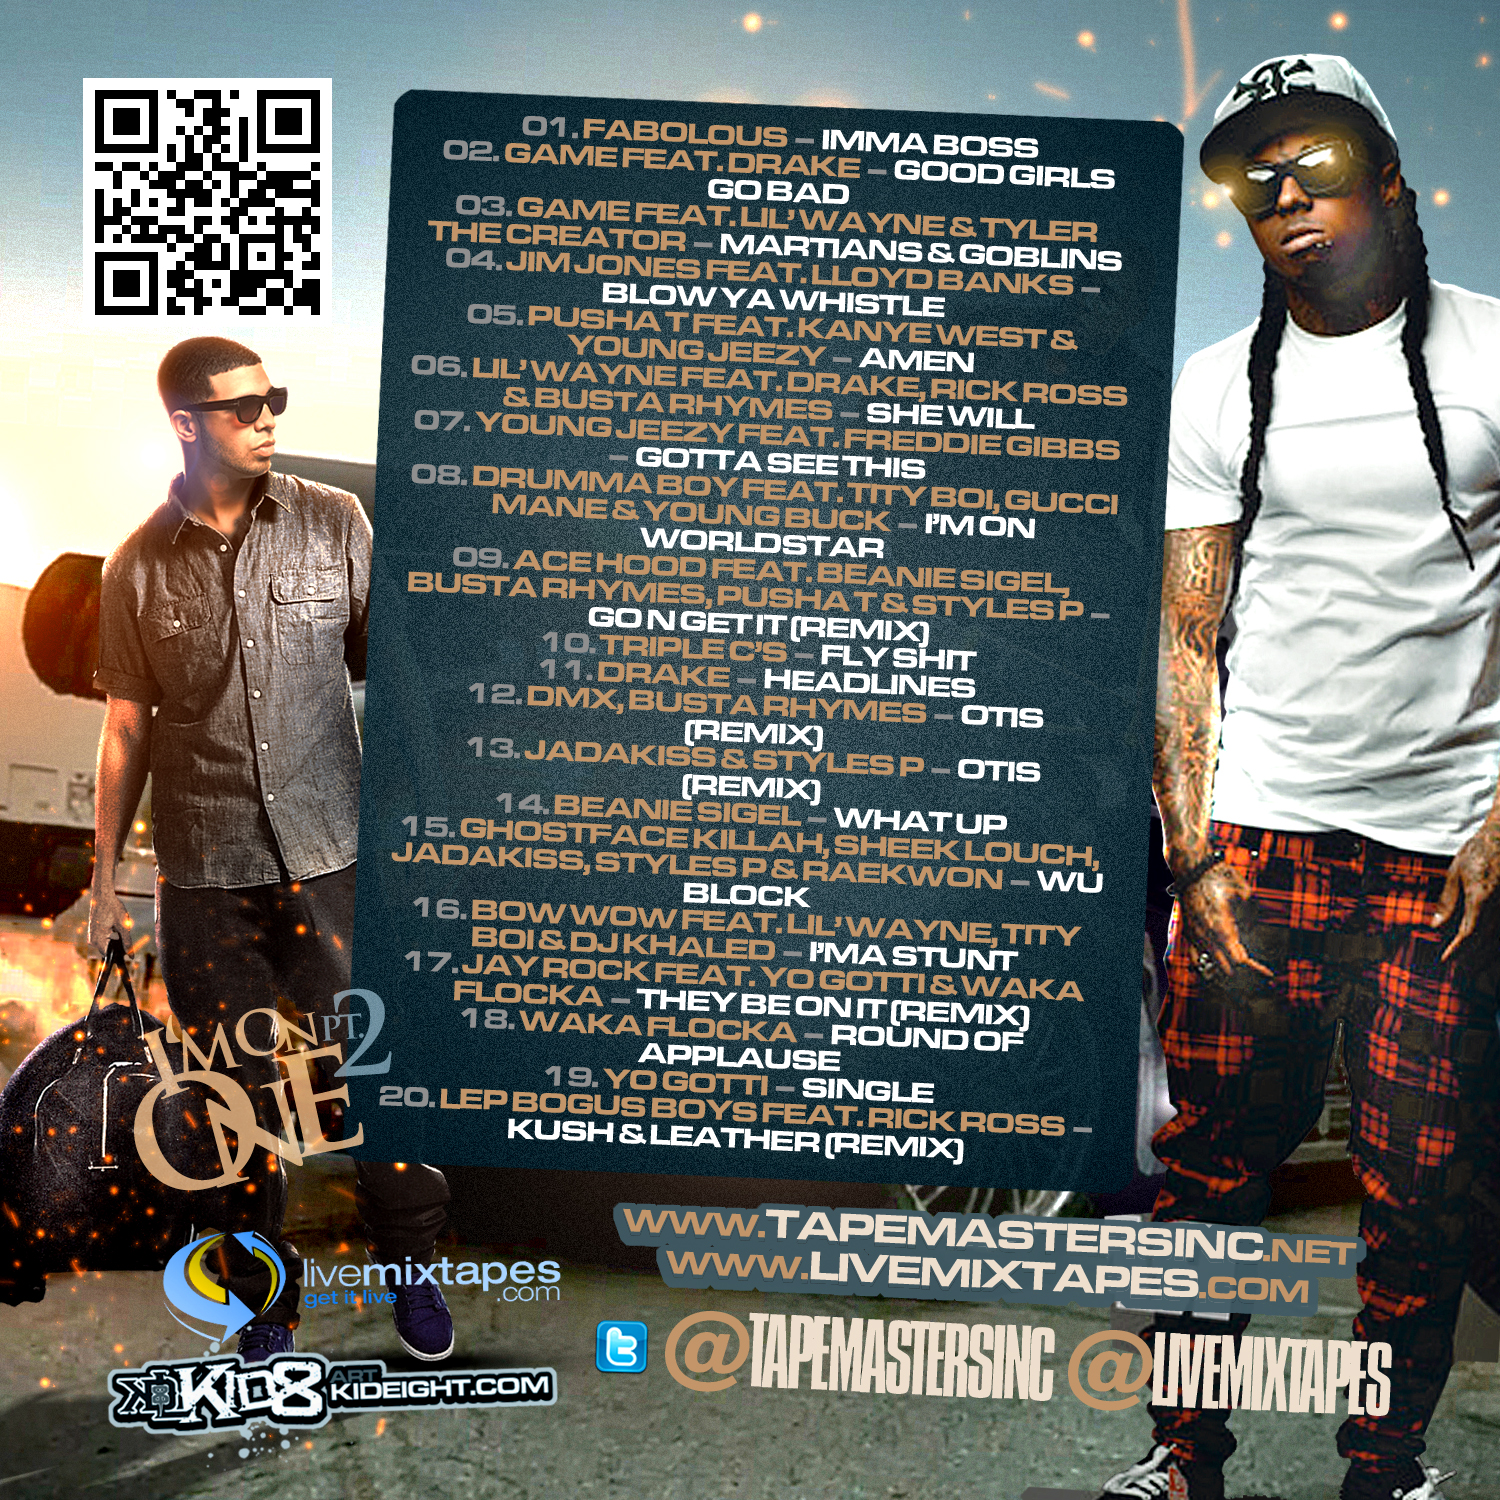 I'm On One, Part 2 Hosted by Tapemasters Inc., Free Mixtape Stream and Download!